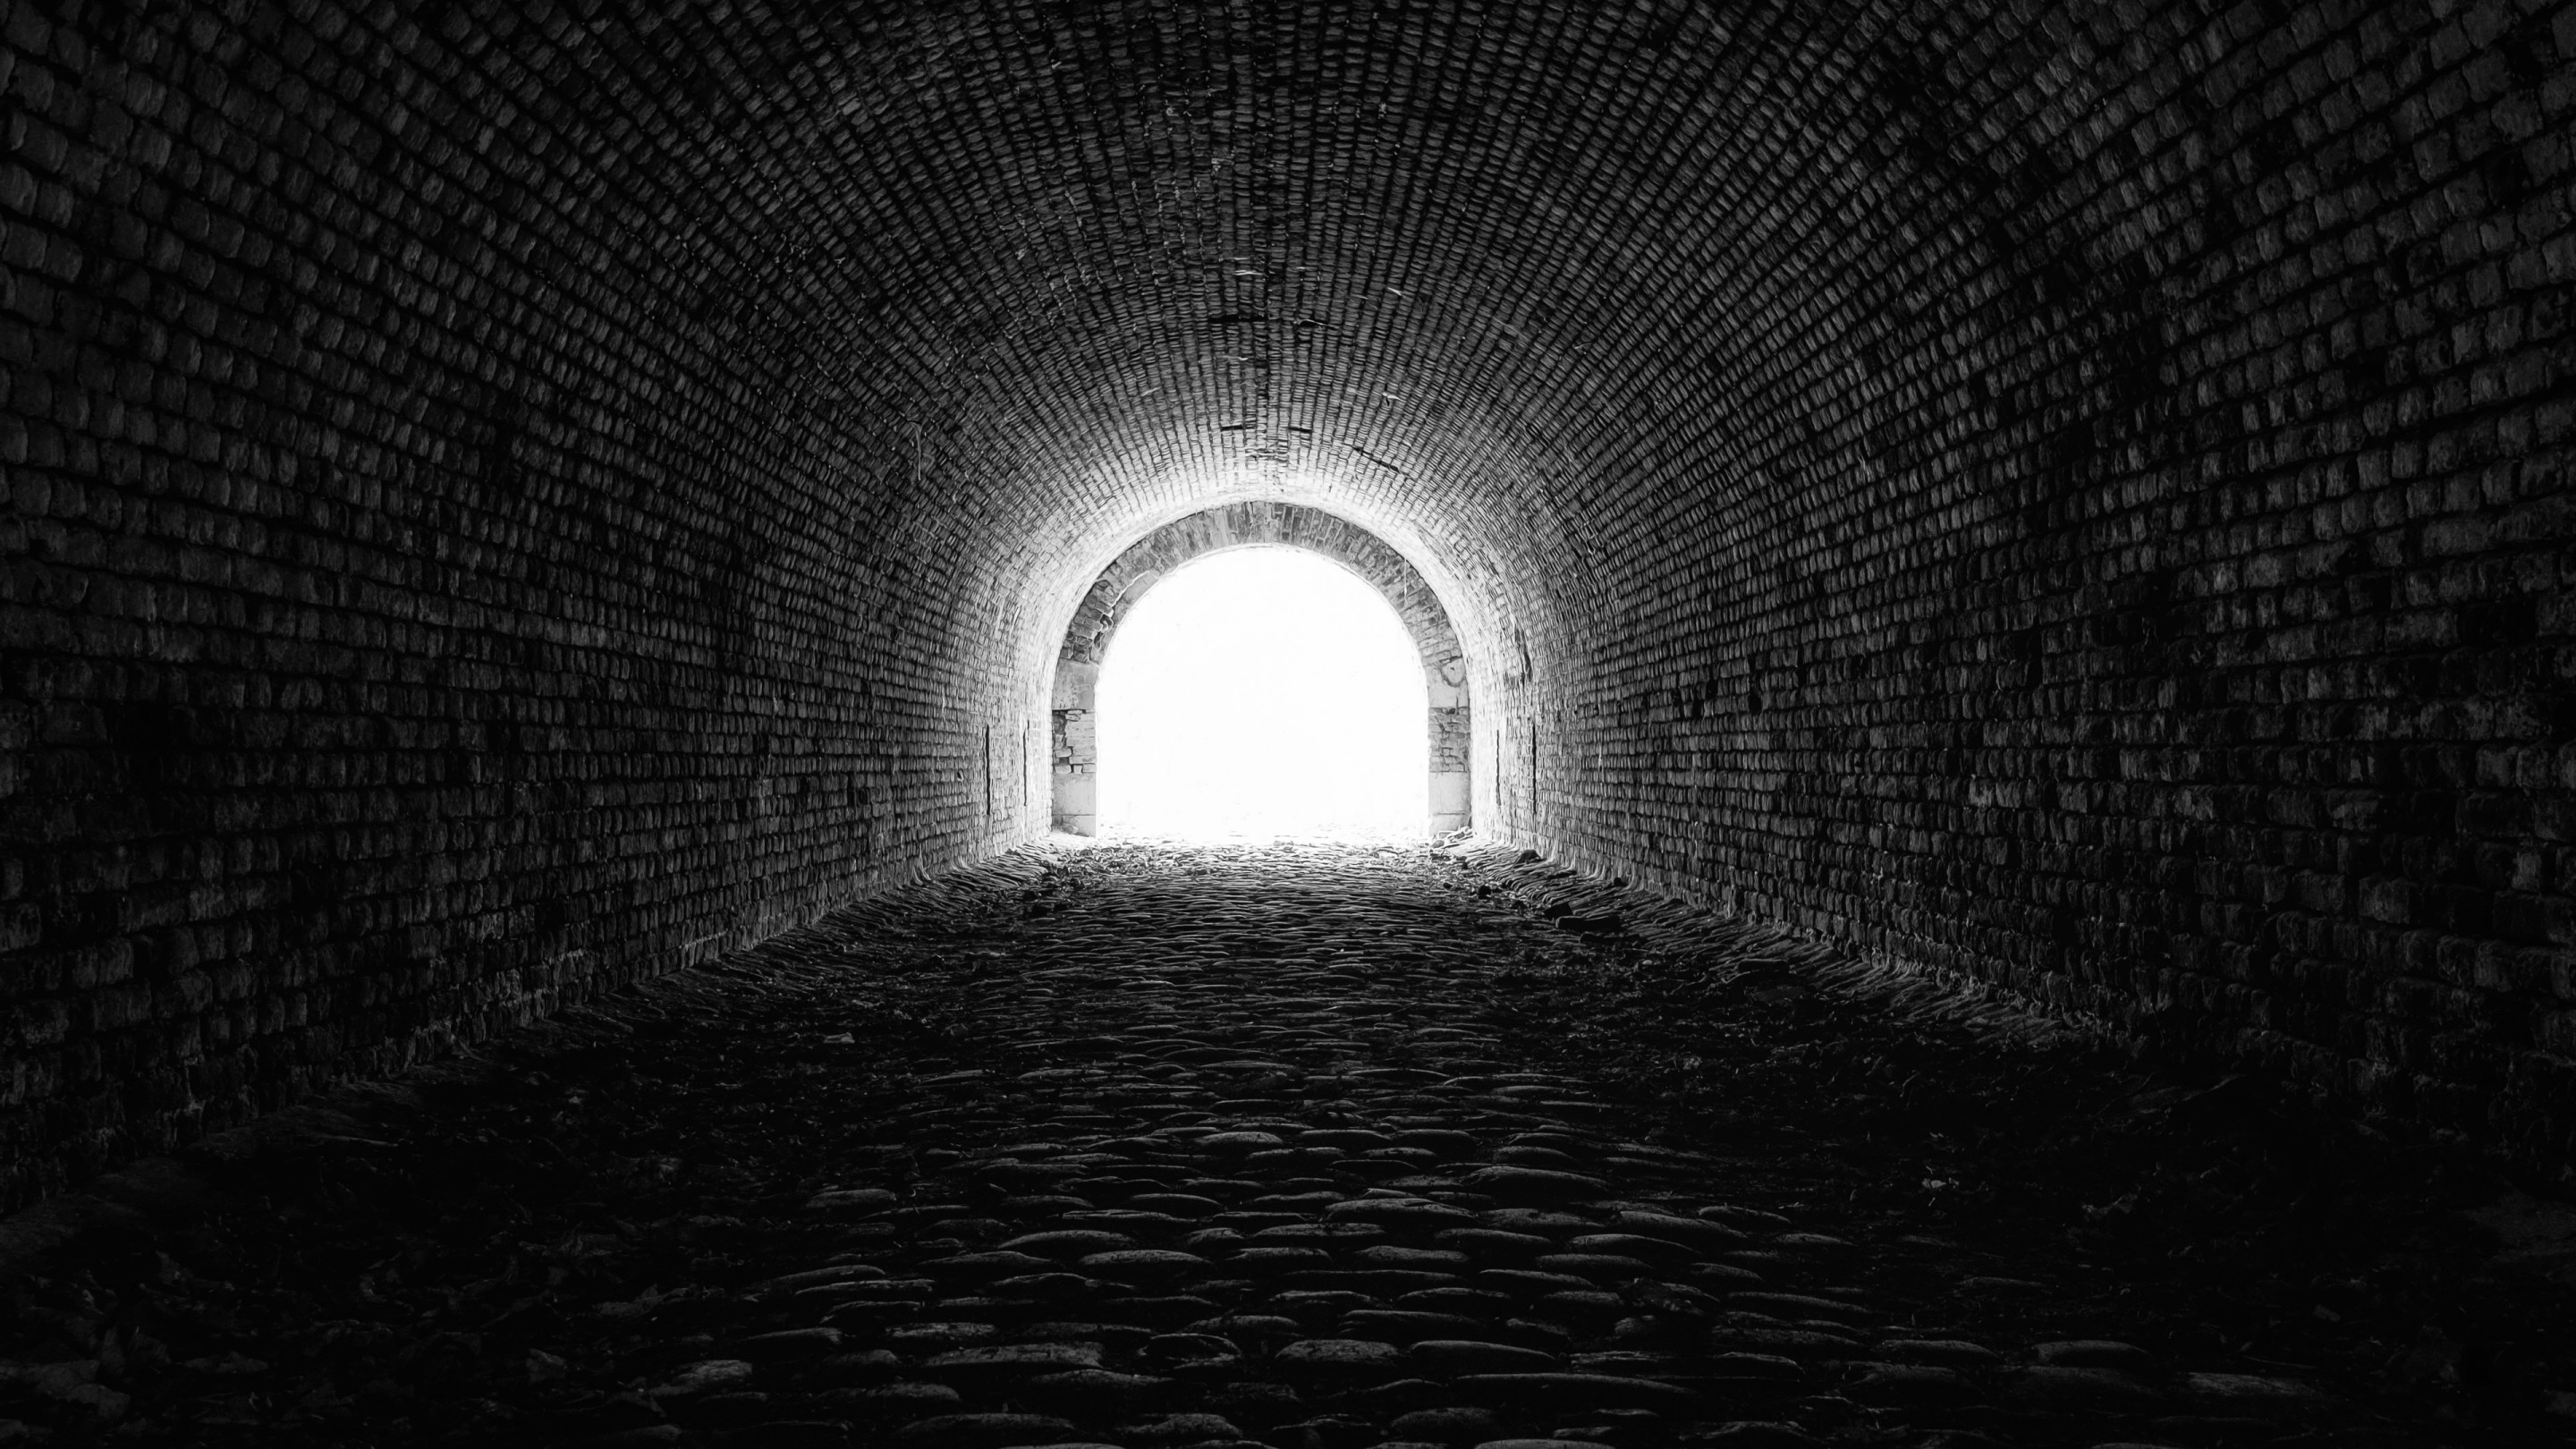 Light at the end of the tunnel wallpaper 2880x1620